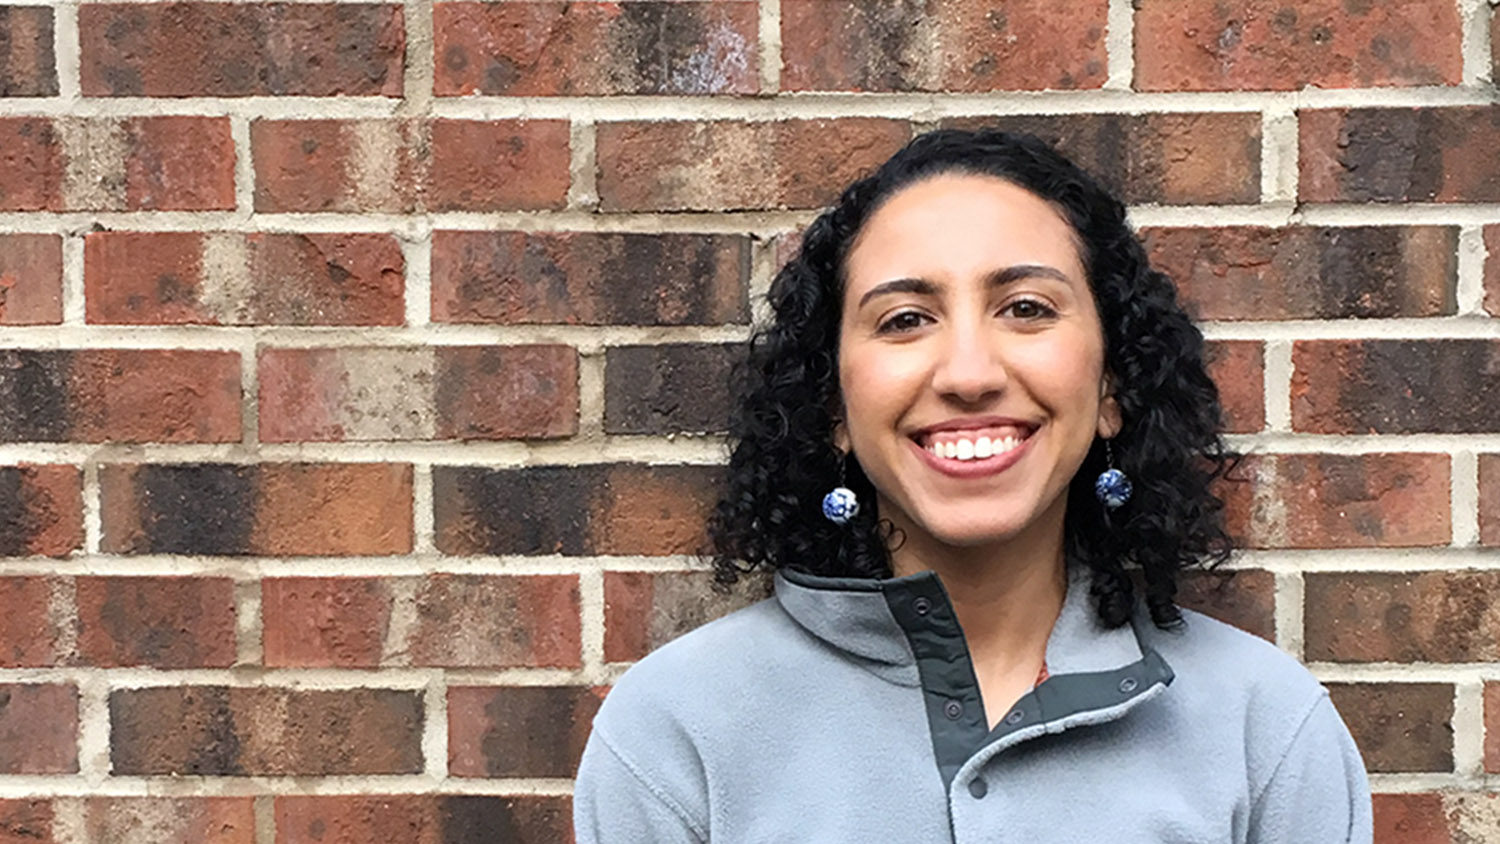 Horticulture's Sarah Hassan in front of a brick wall, smiling, at CALS.